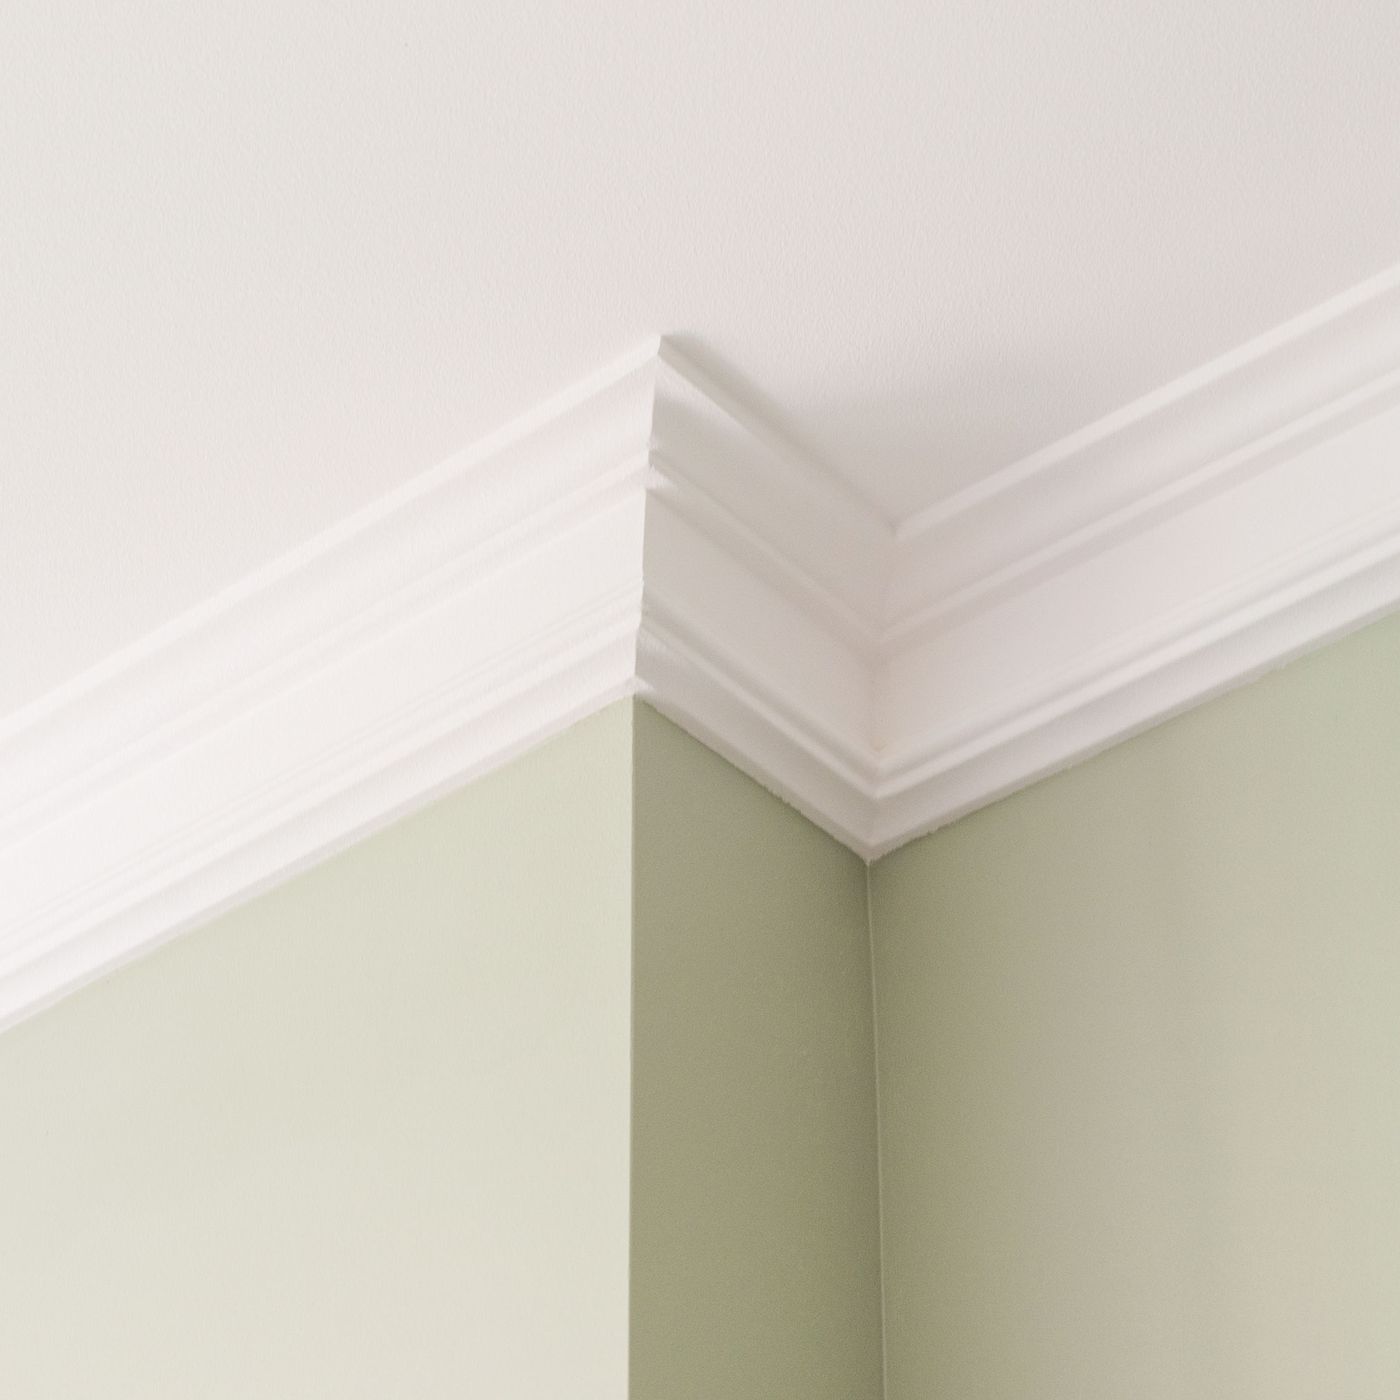 Everything You Need to Know about Plastic Trim Molding